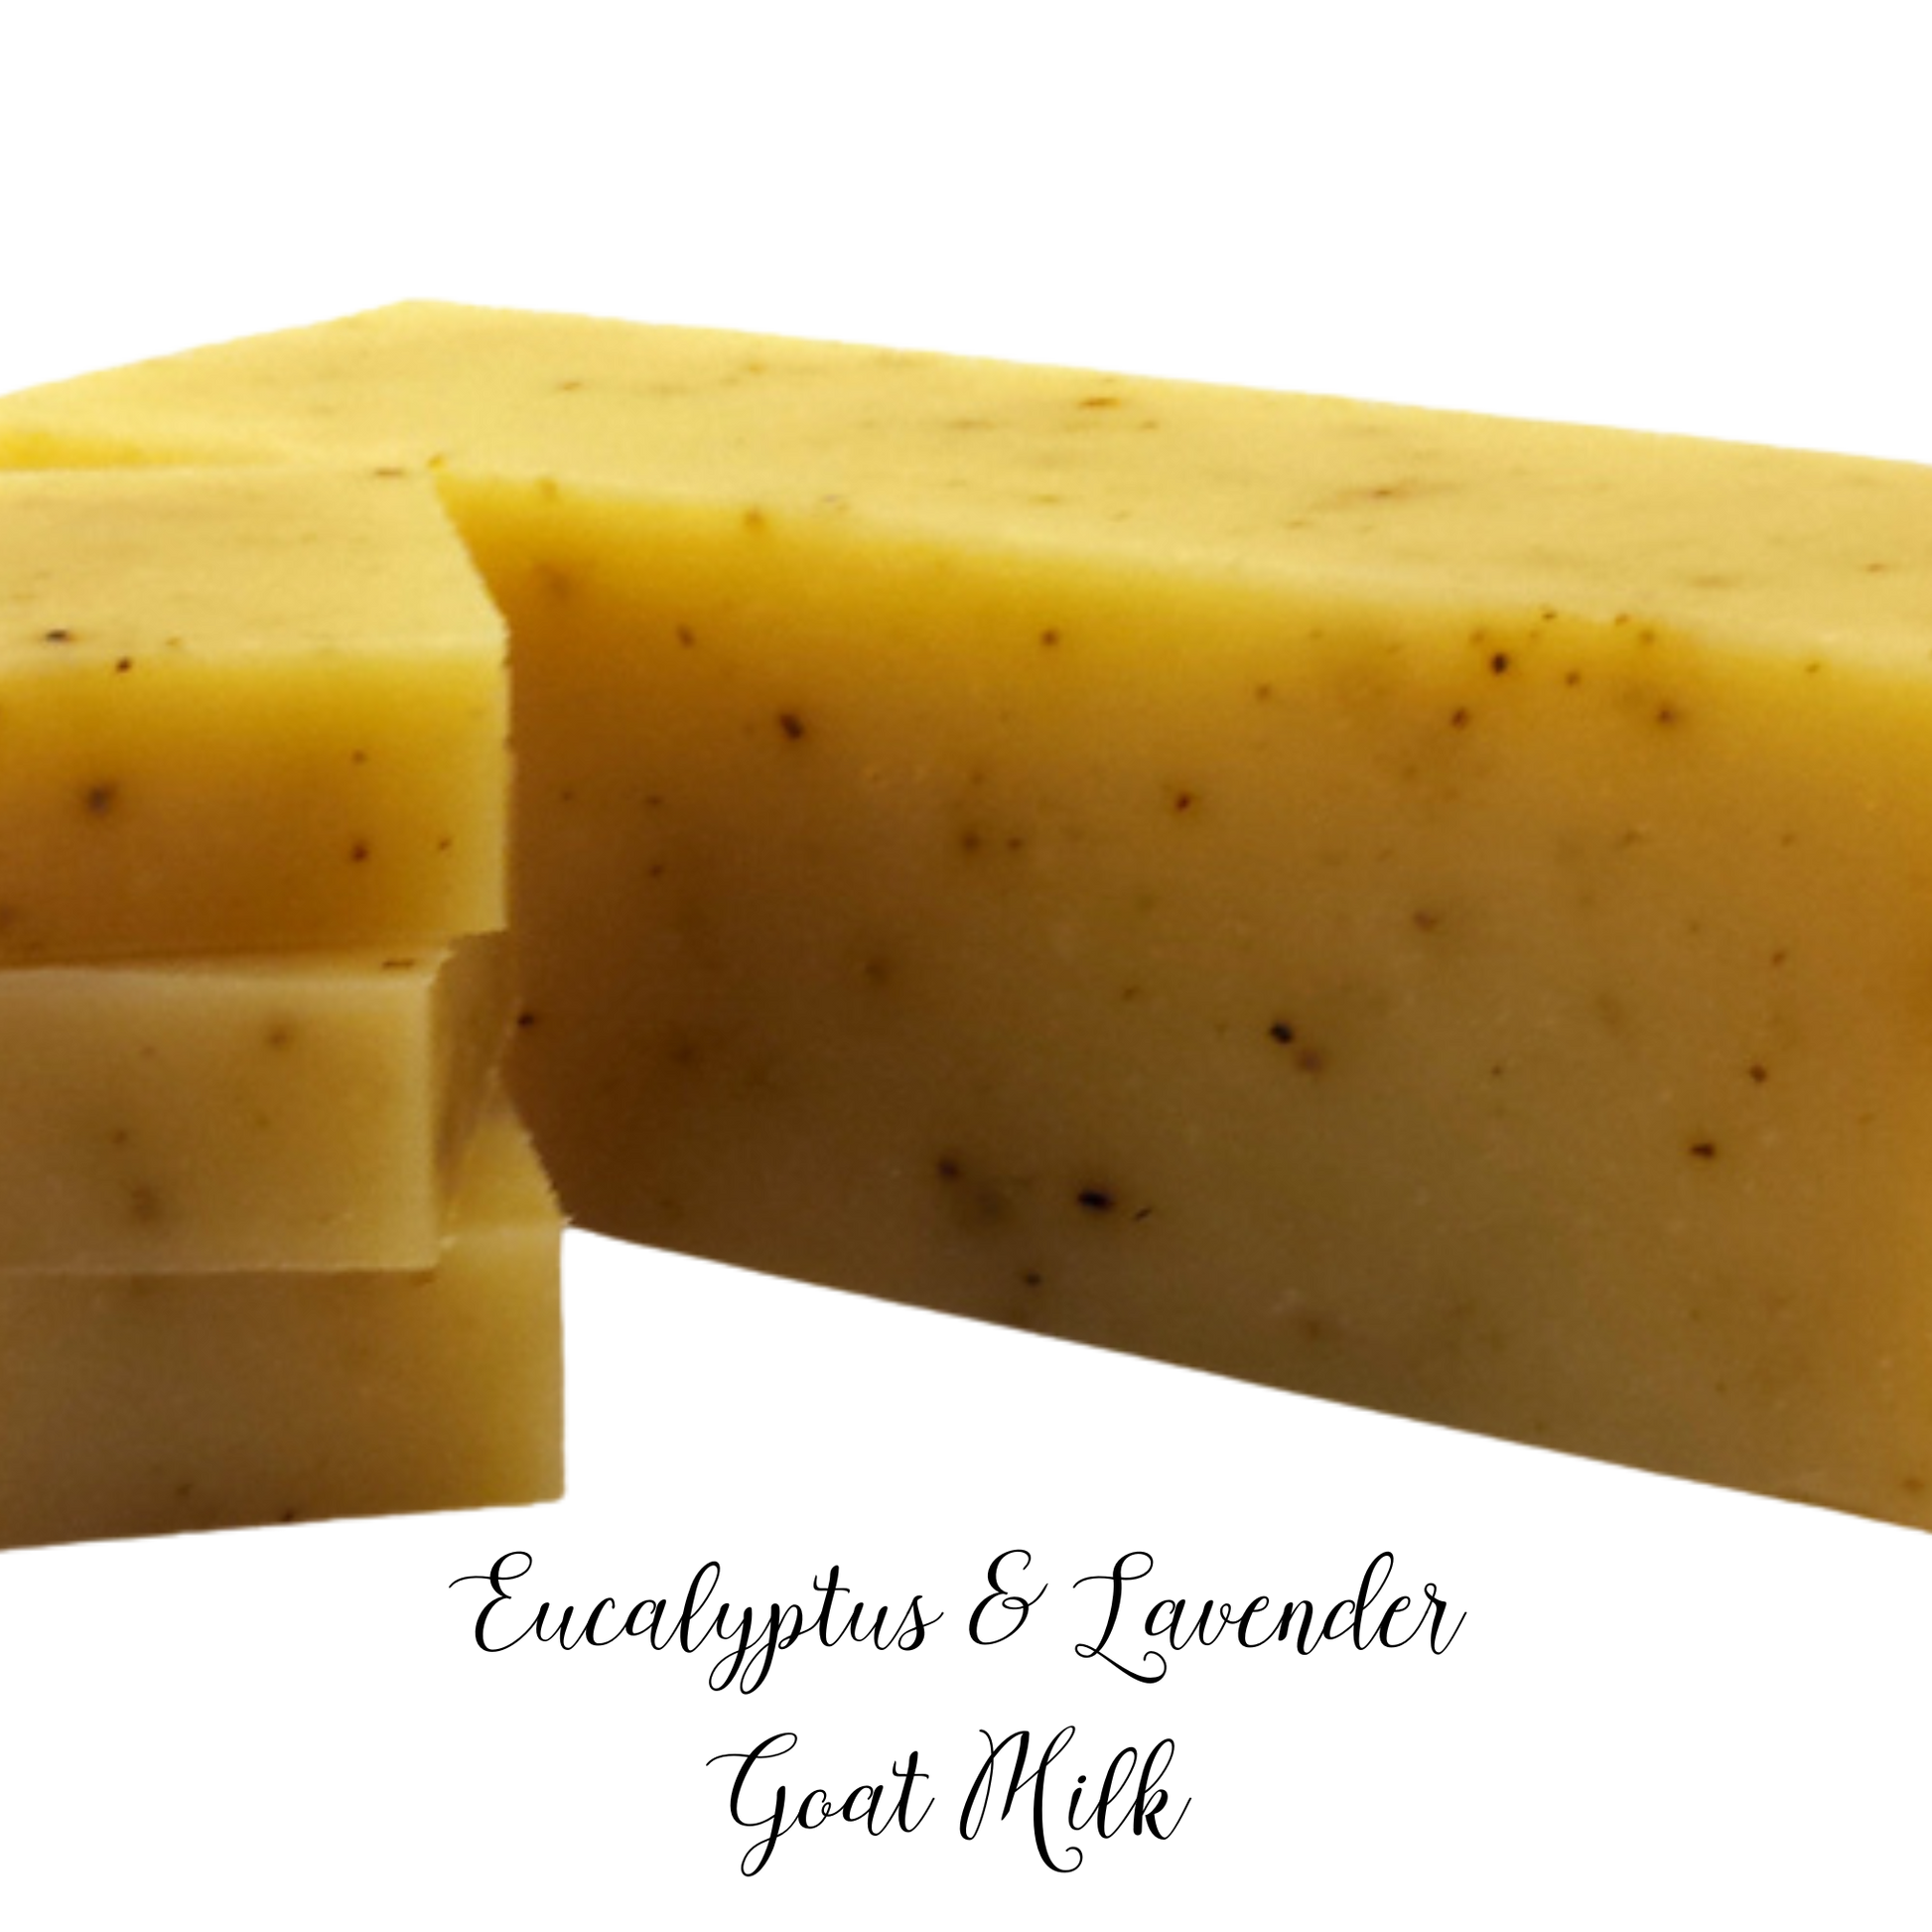 smells likeNatural eucalyptus oil mixed with lavender  for a very relaxing blend. 4.5 oz bar soap